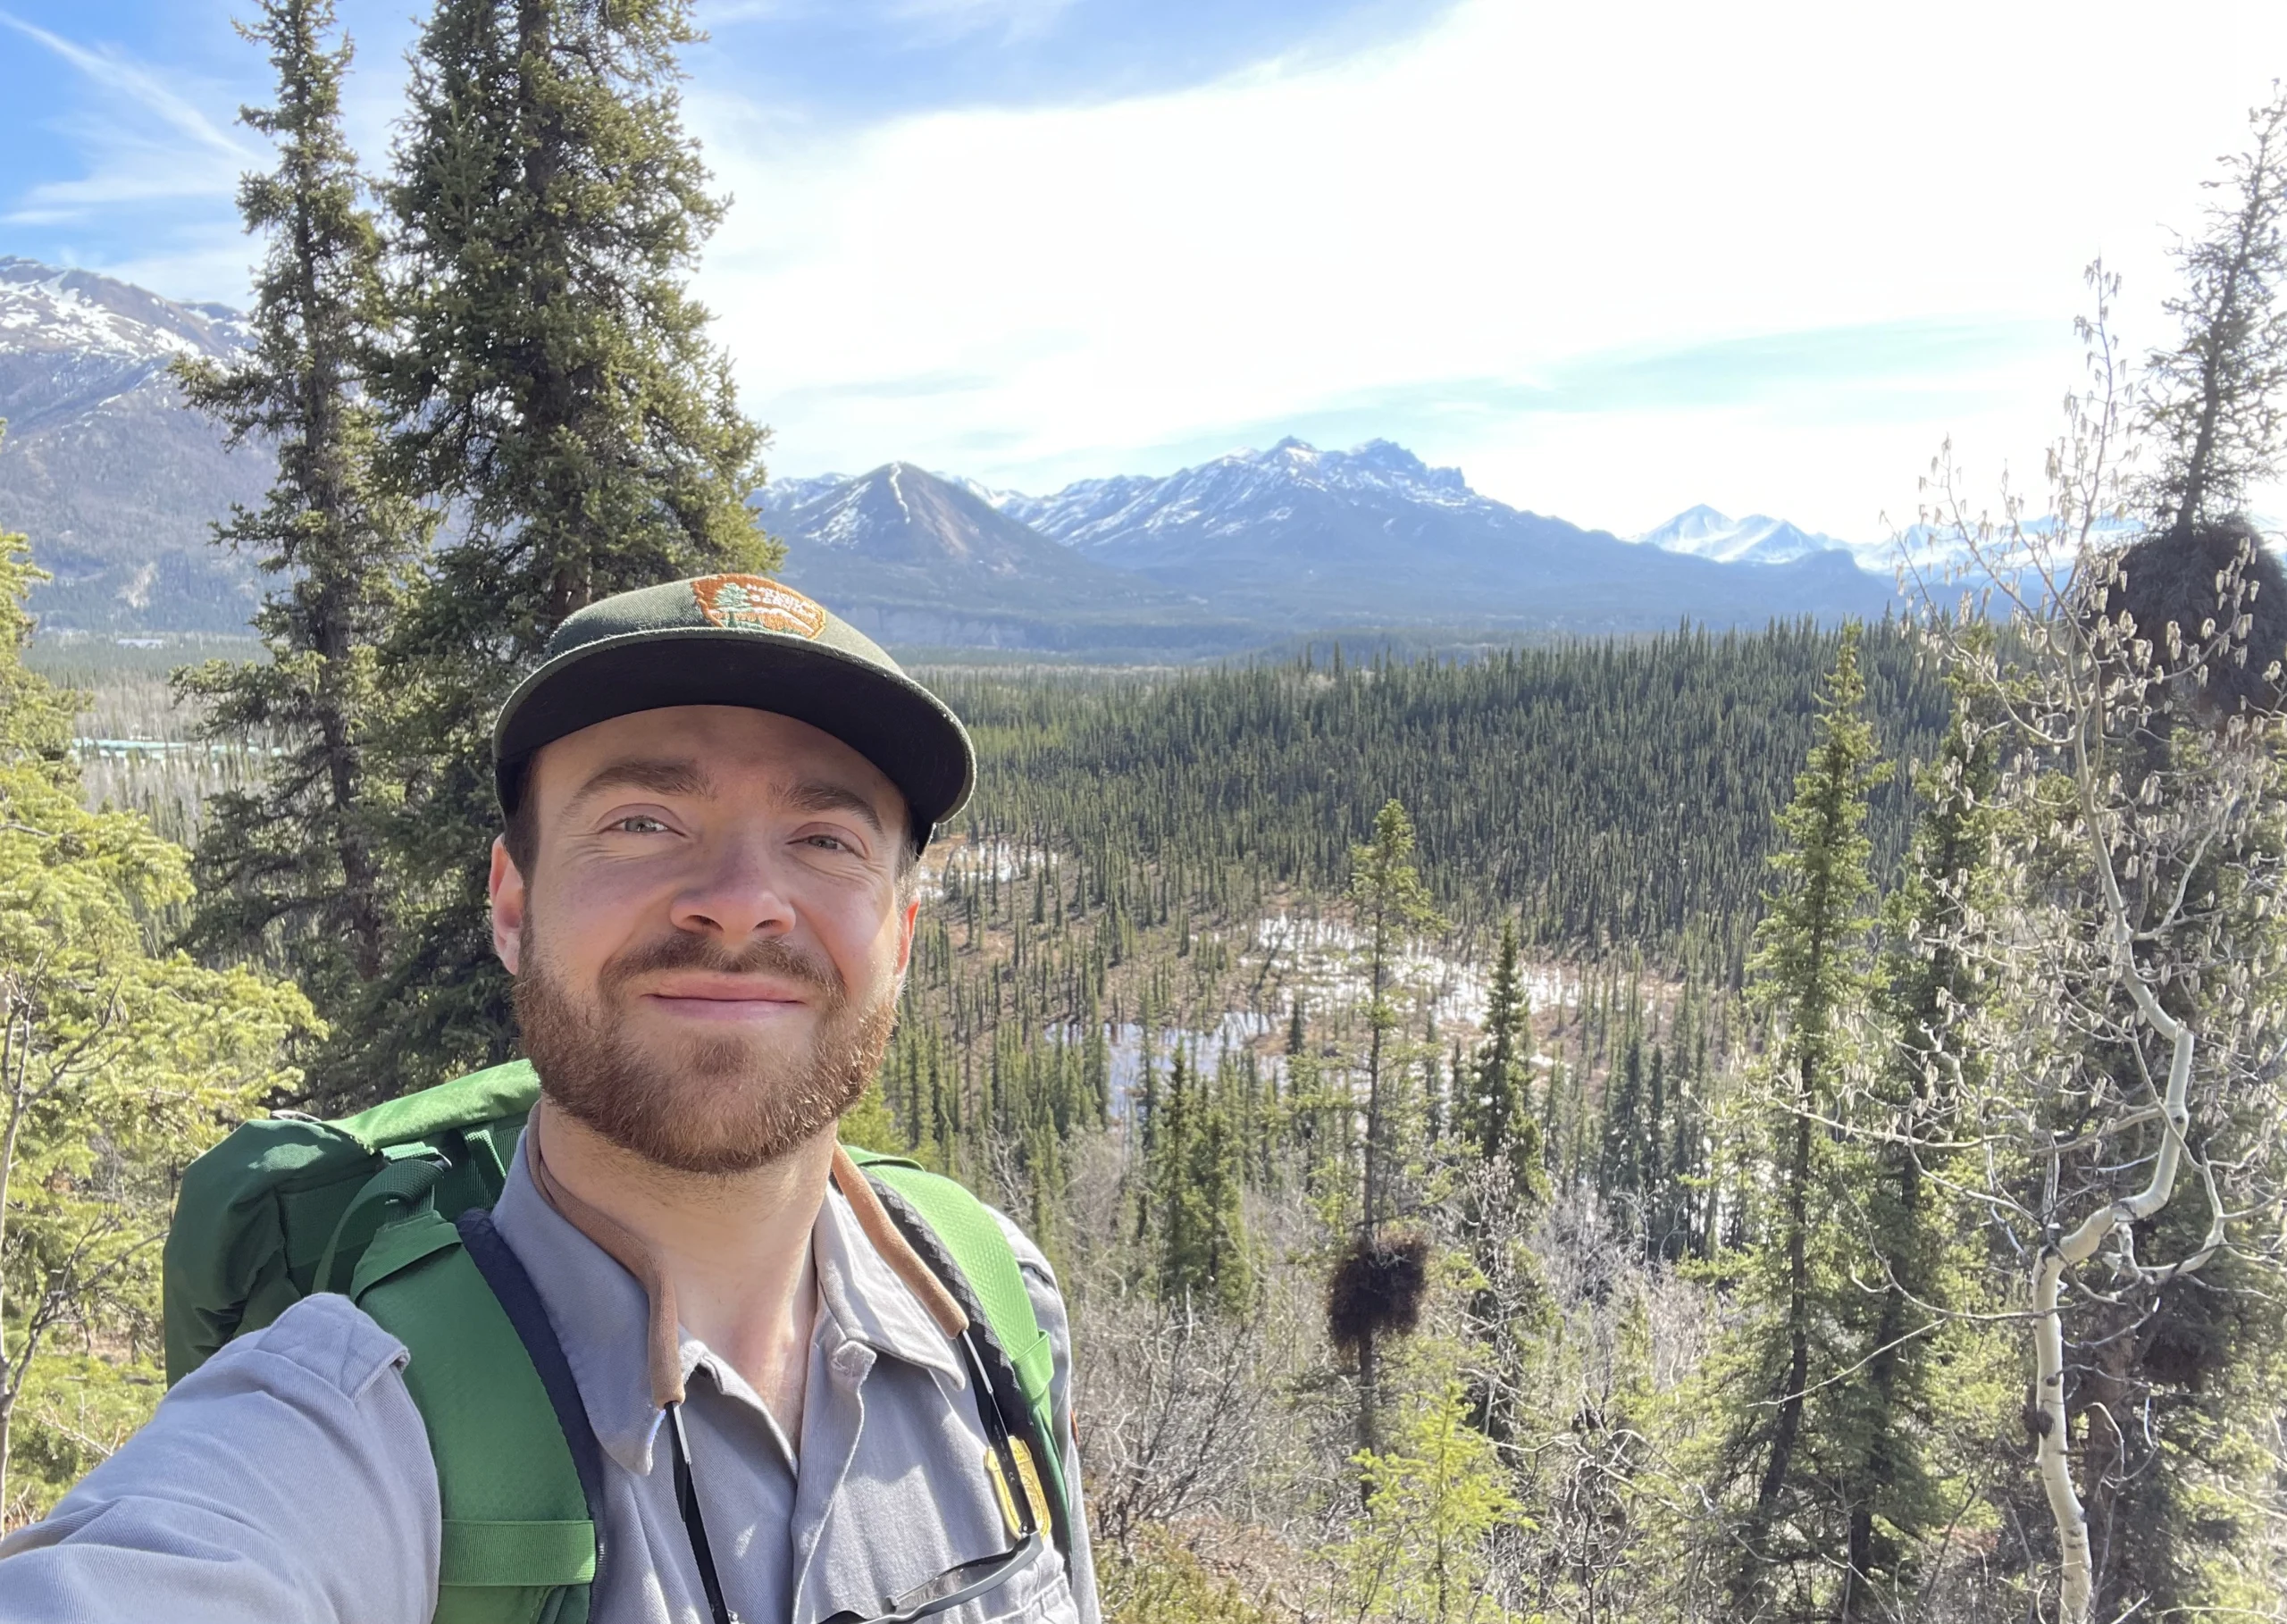 A young adult in a hat with a beard takes a selfie in the forest with snow-capped mountains in the background